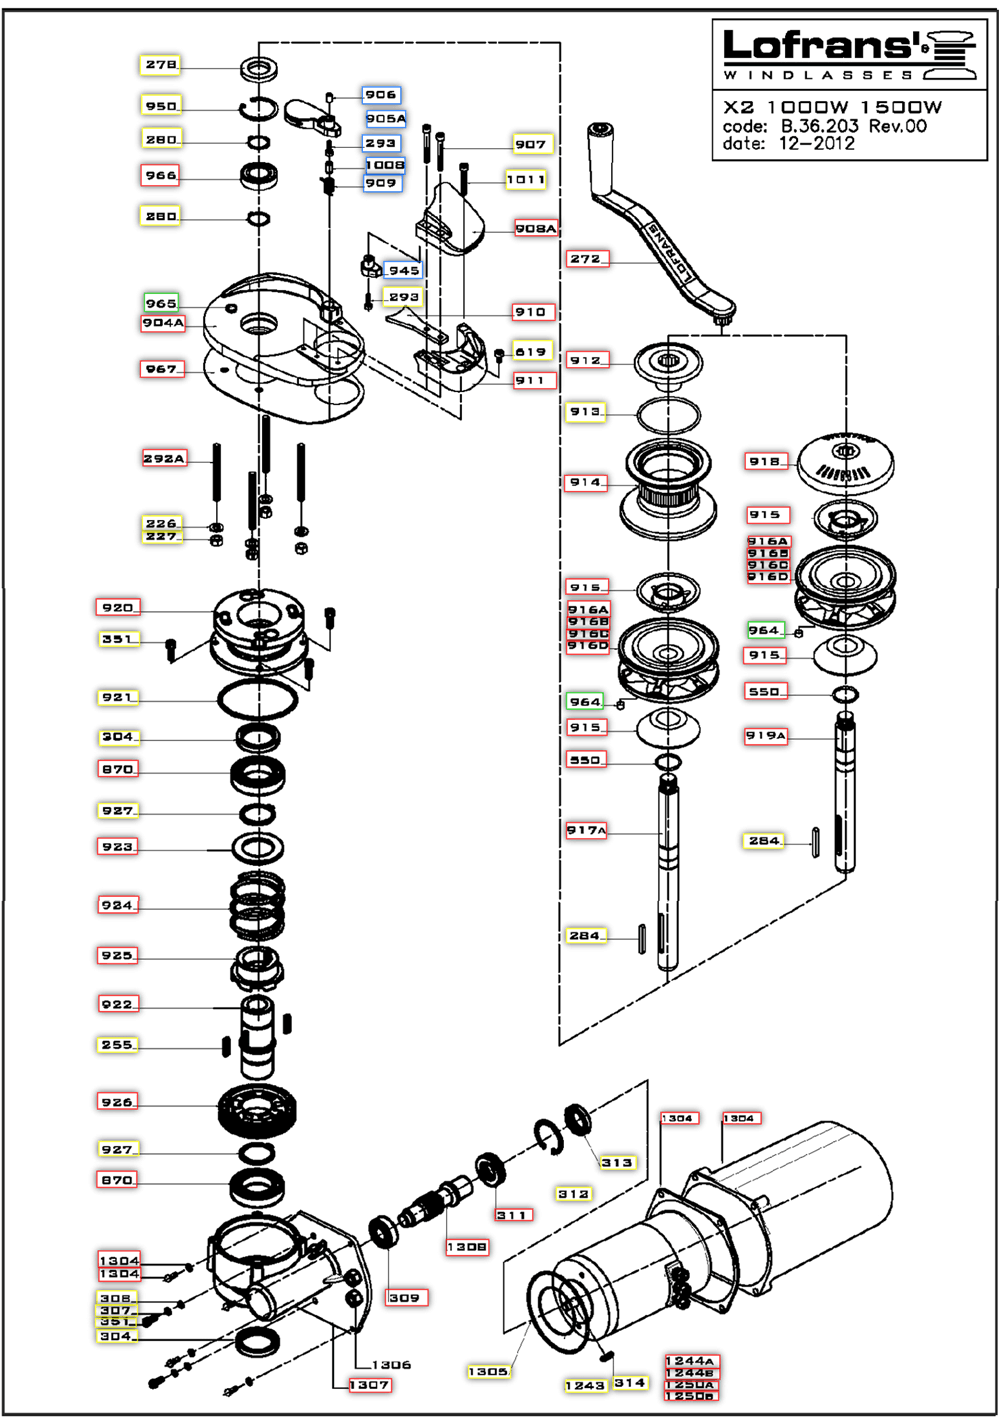 Lfrans X2 and Project 1000/1500 Exploded Parts Diagram